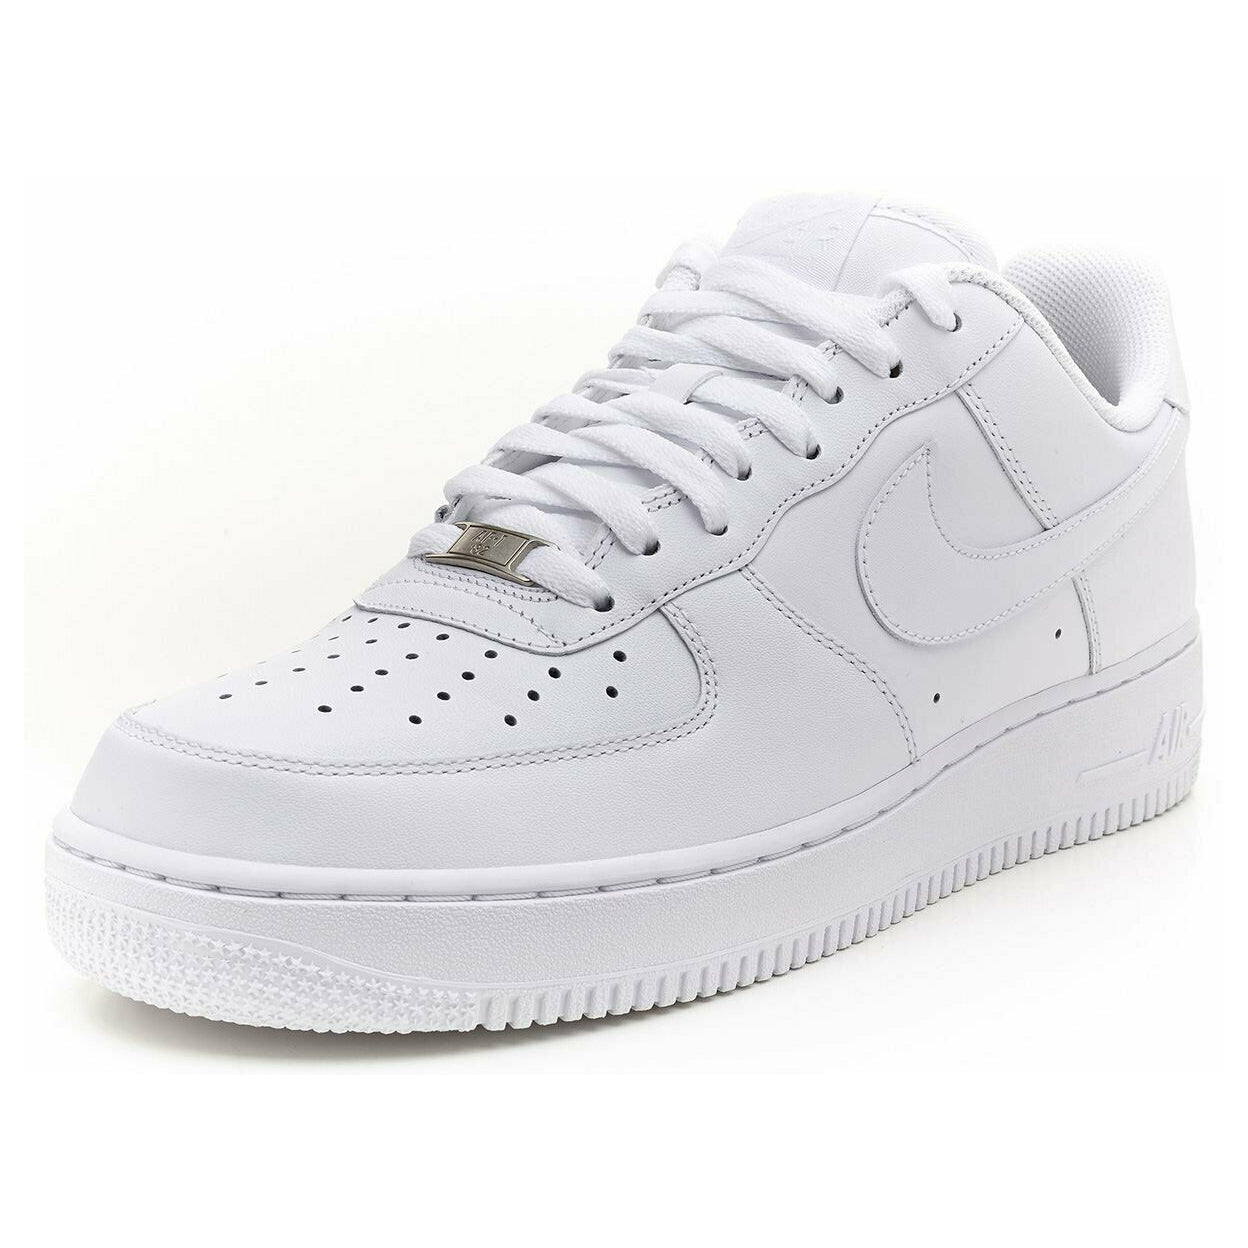 size 13 mens air force 1